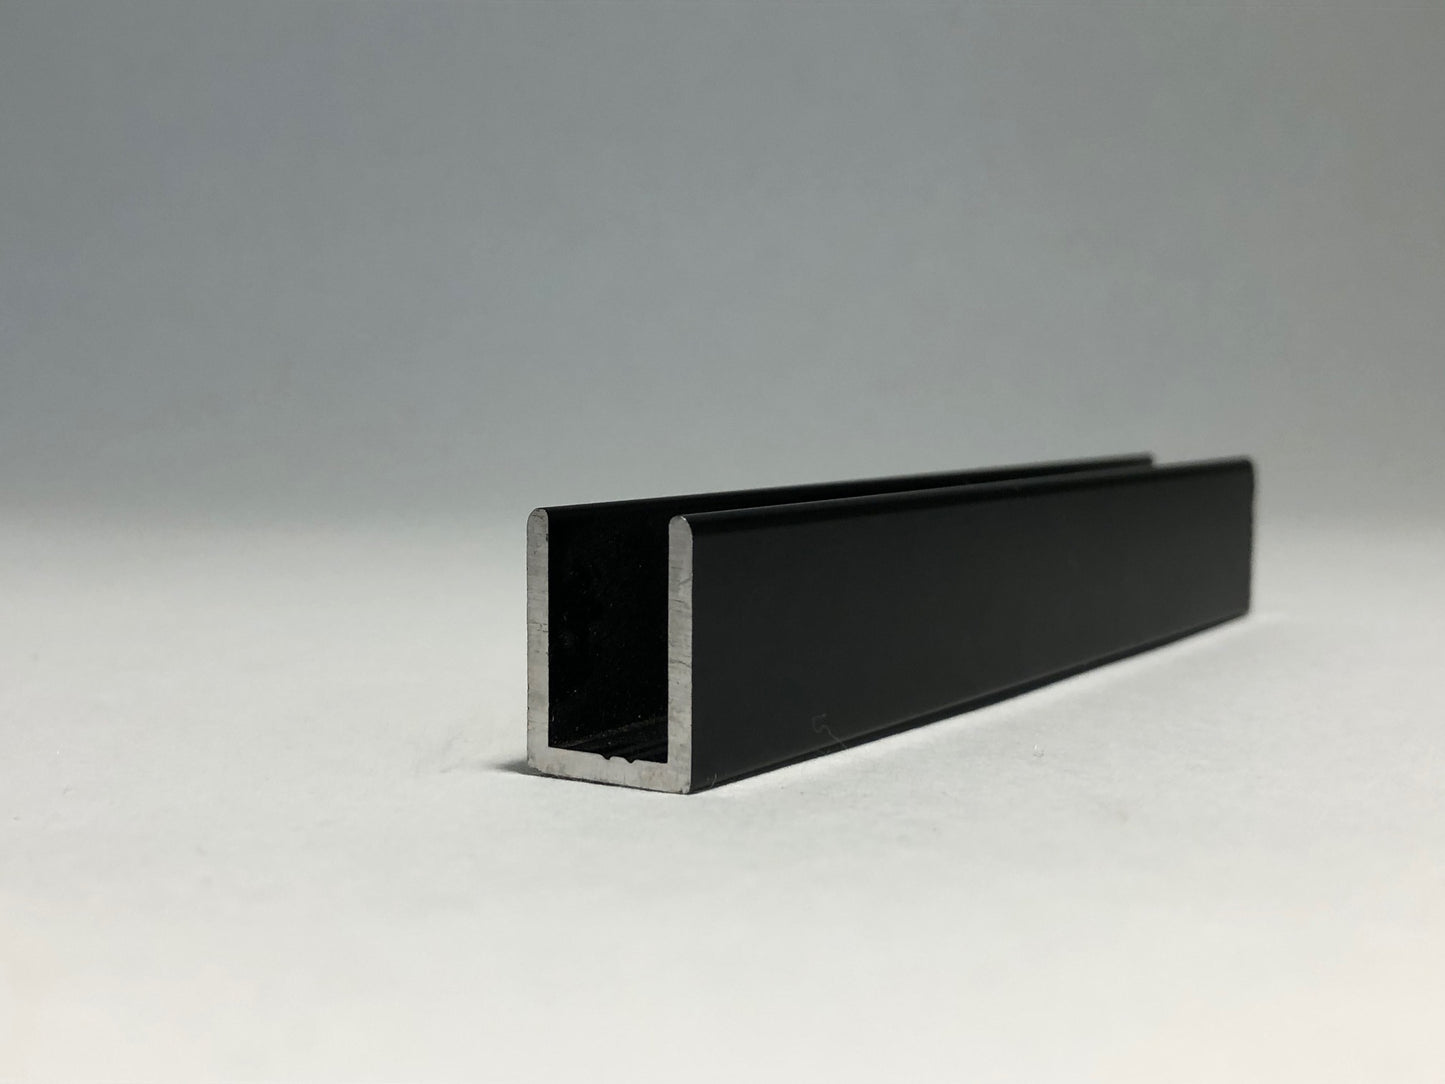 10mm U Channel - 3.66m - Matte Black - Suitable for all 10mm Glass Shower Panels, Screens and Bespoke Glass Shower Enclosures